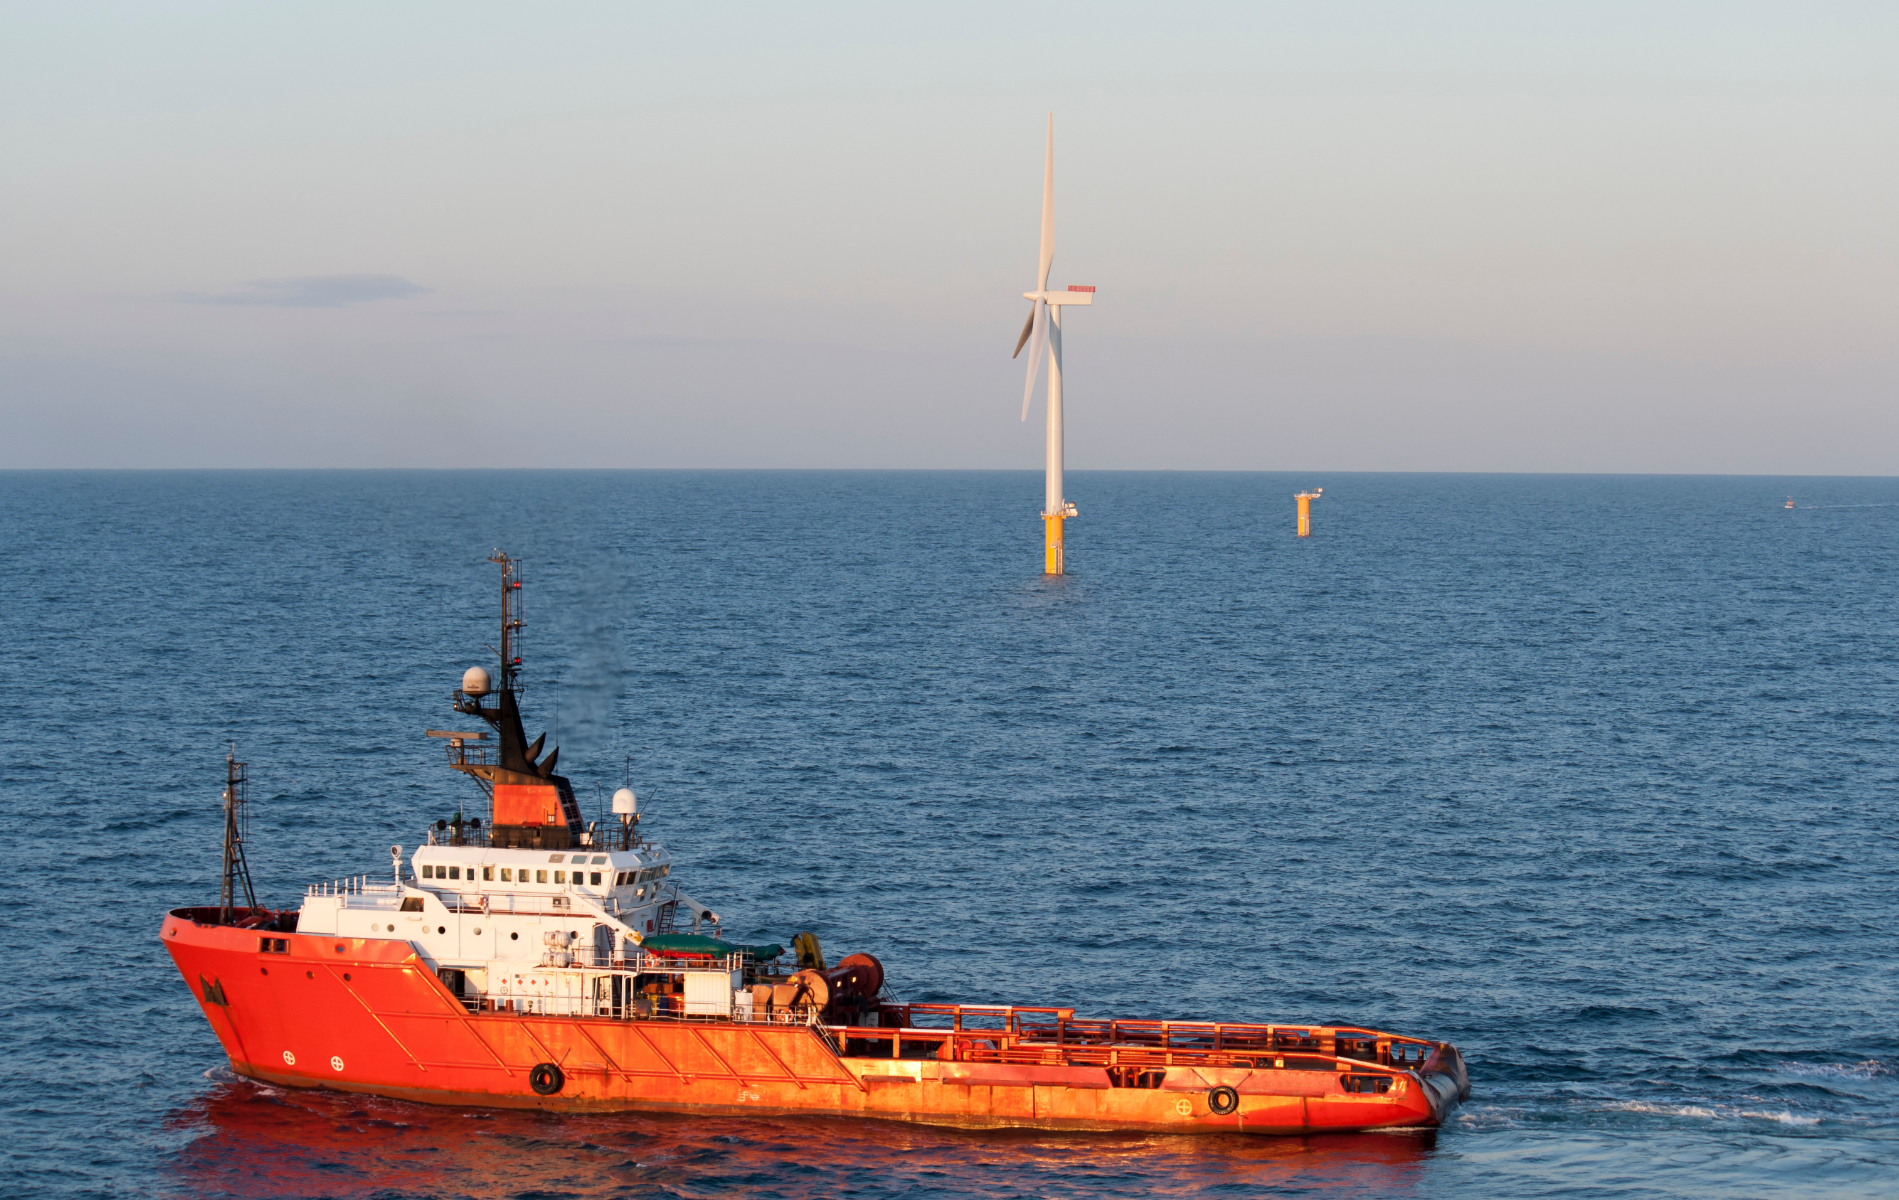 offshore wind turbine and boat